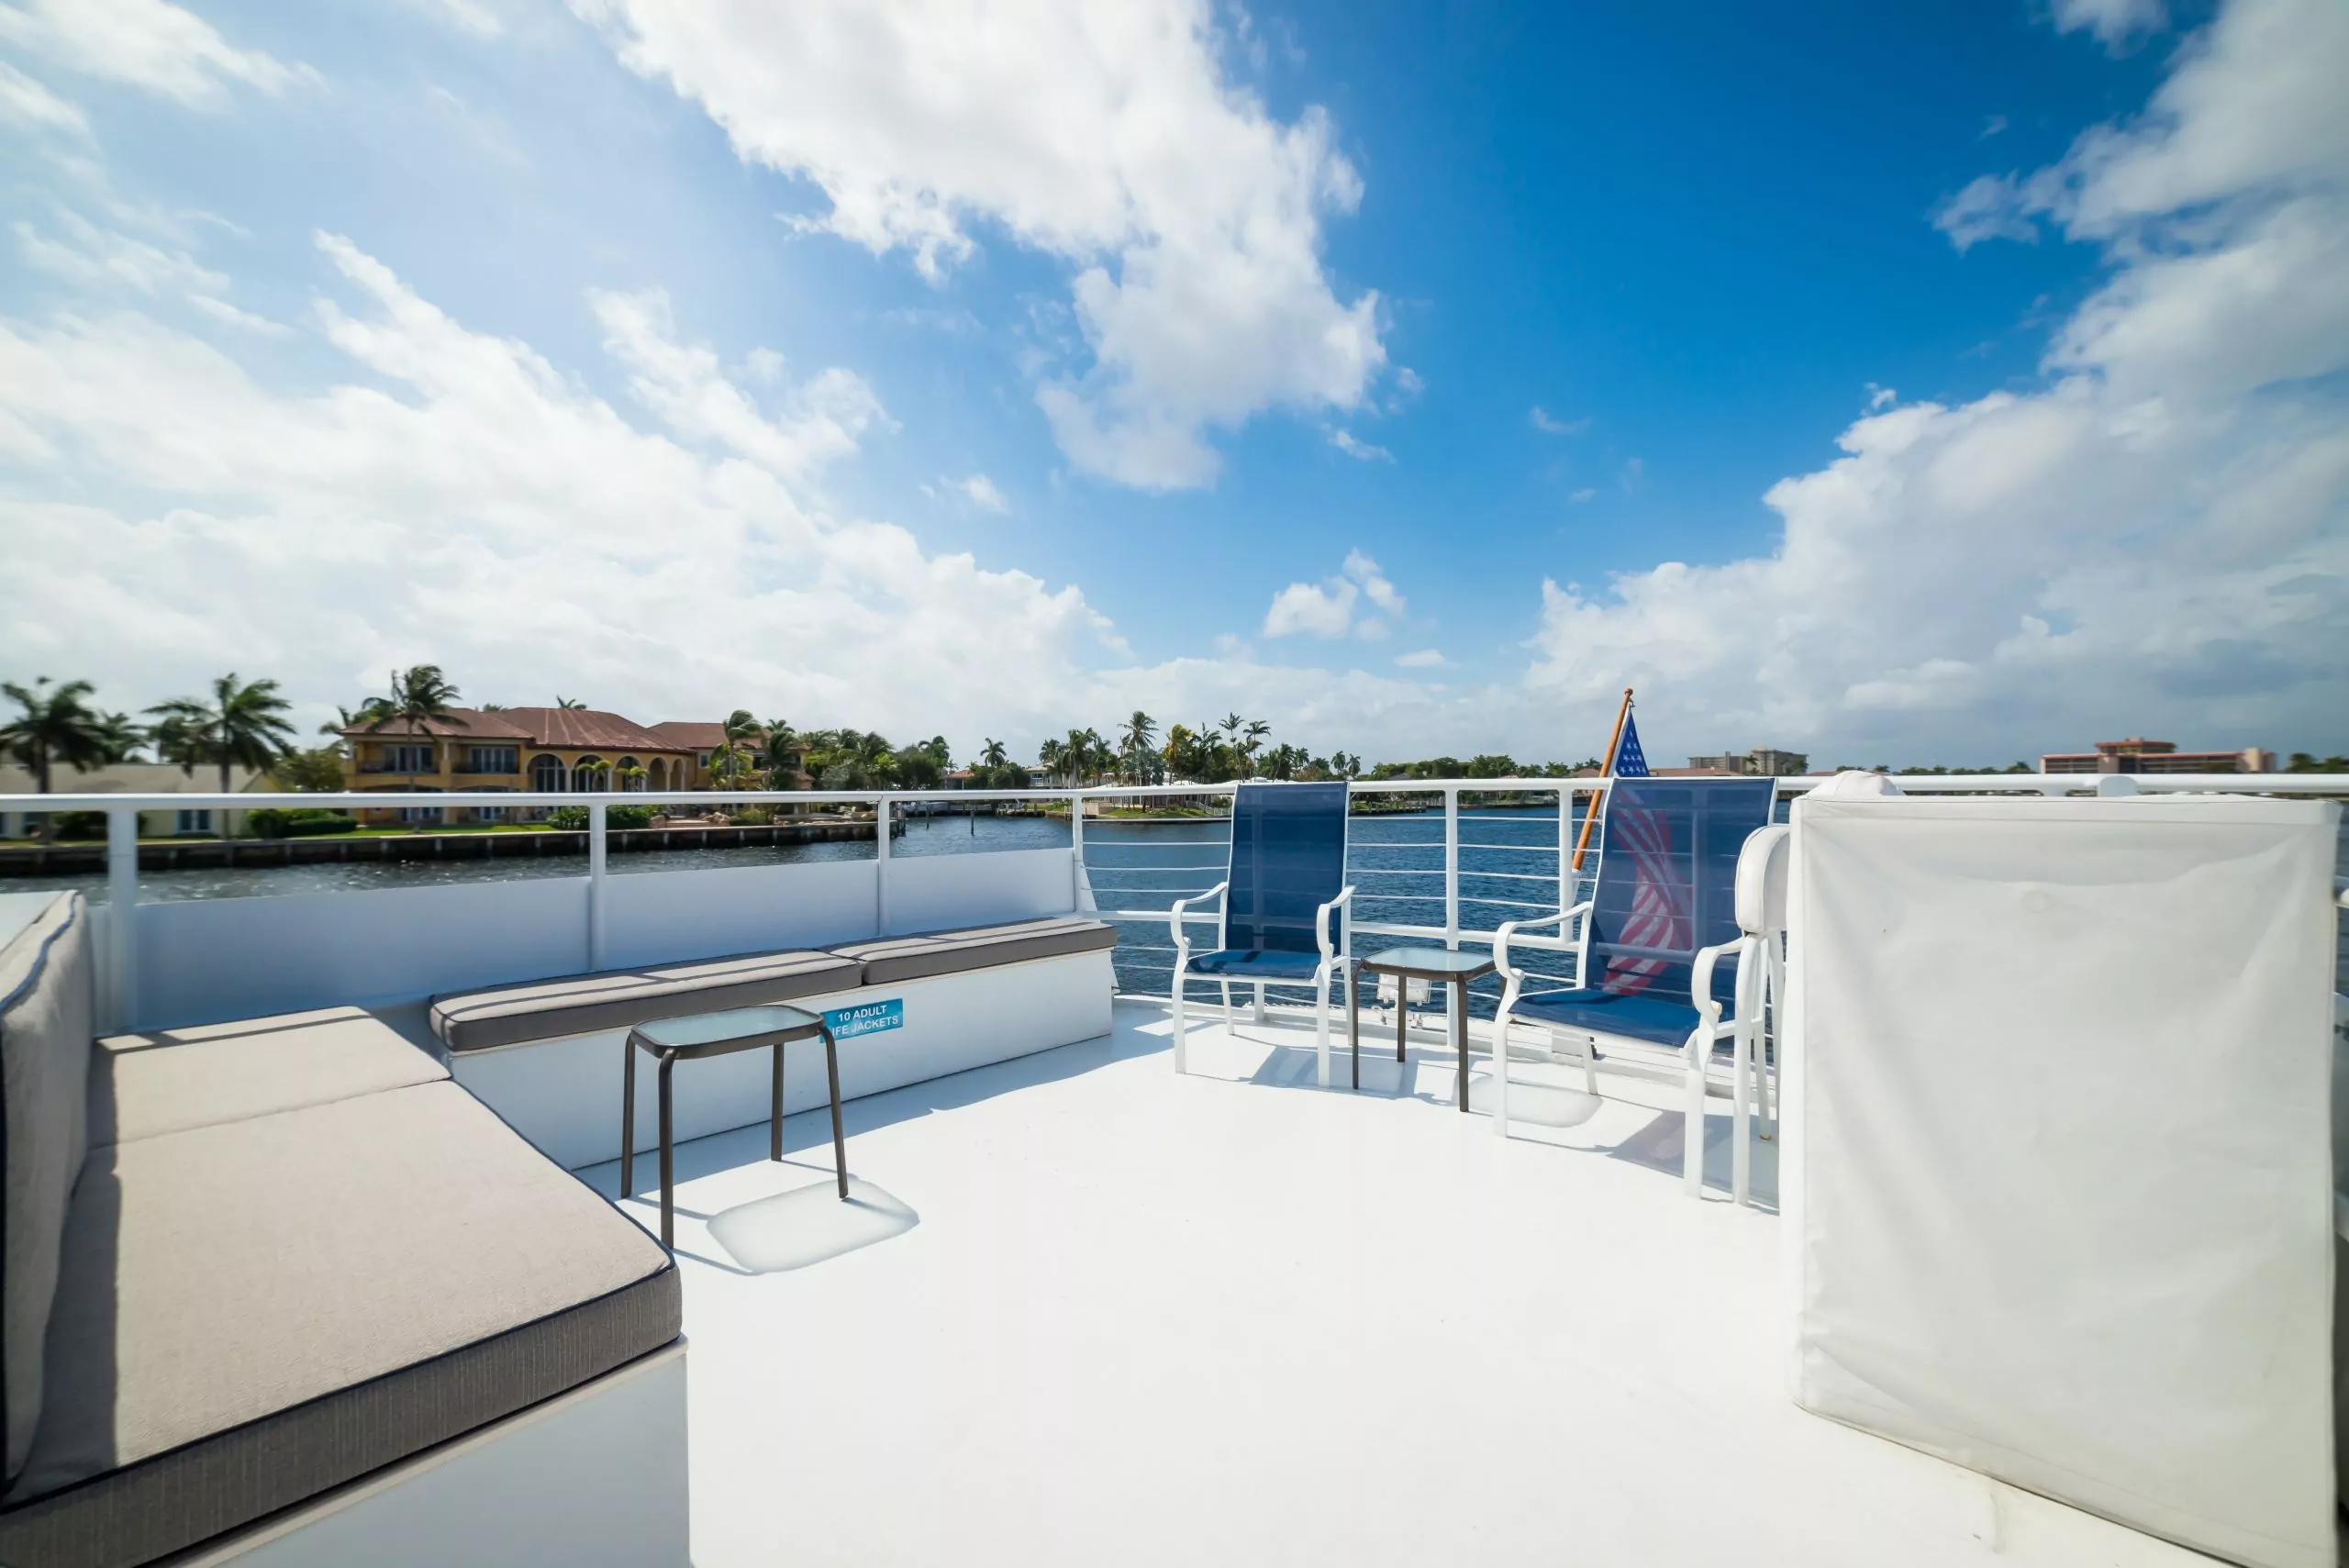 boca raton yacht charters private parties and dinners